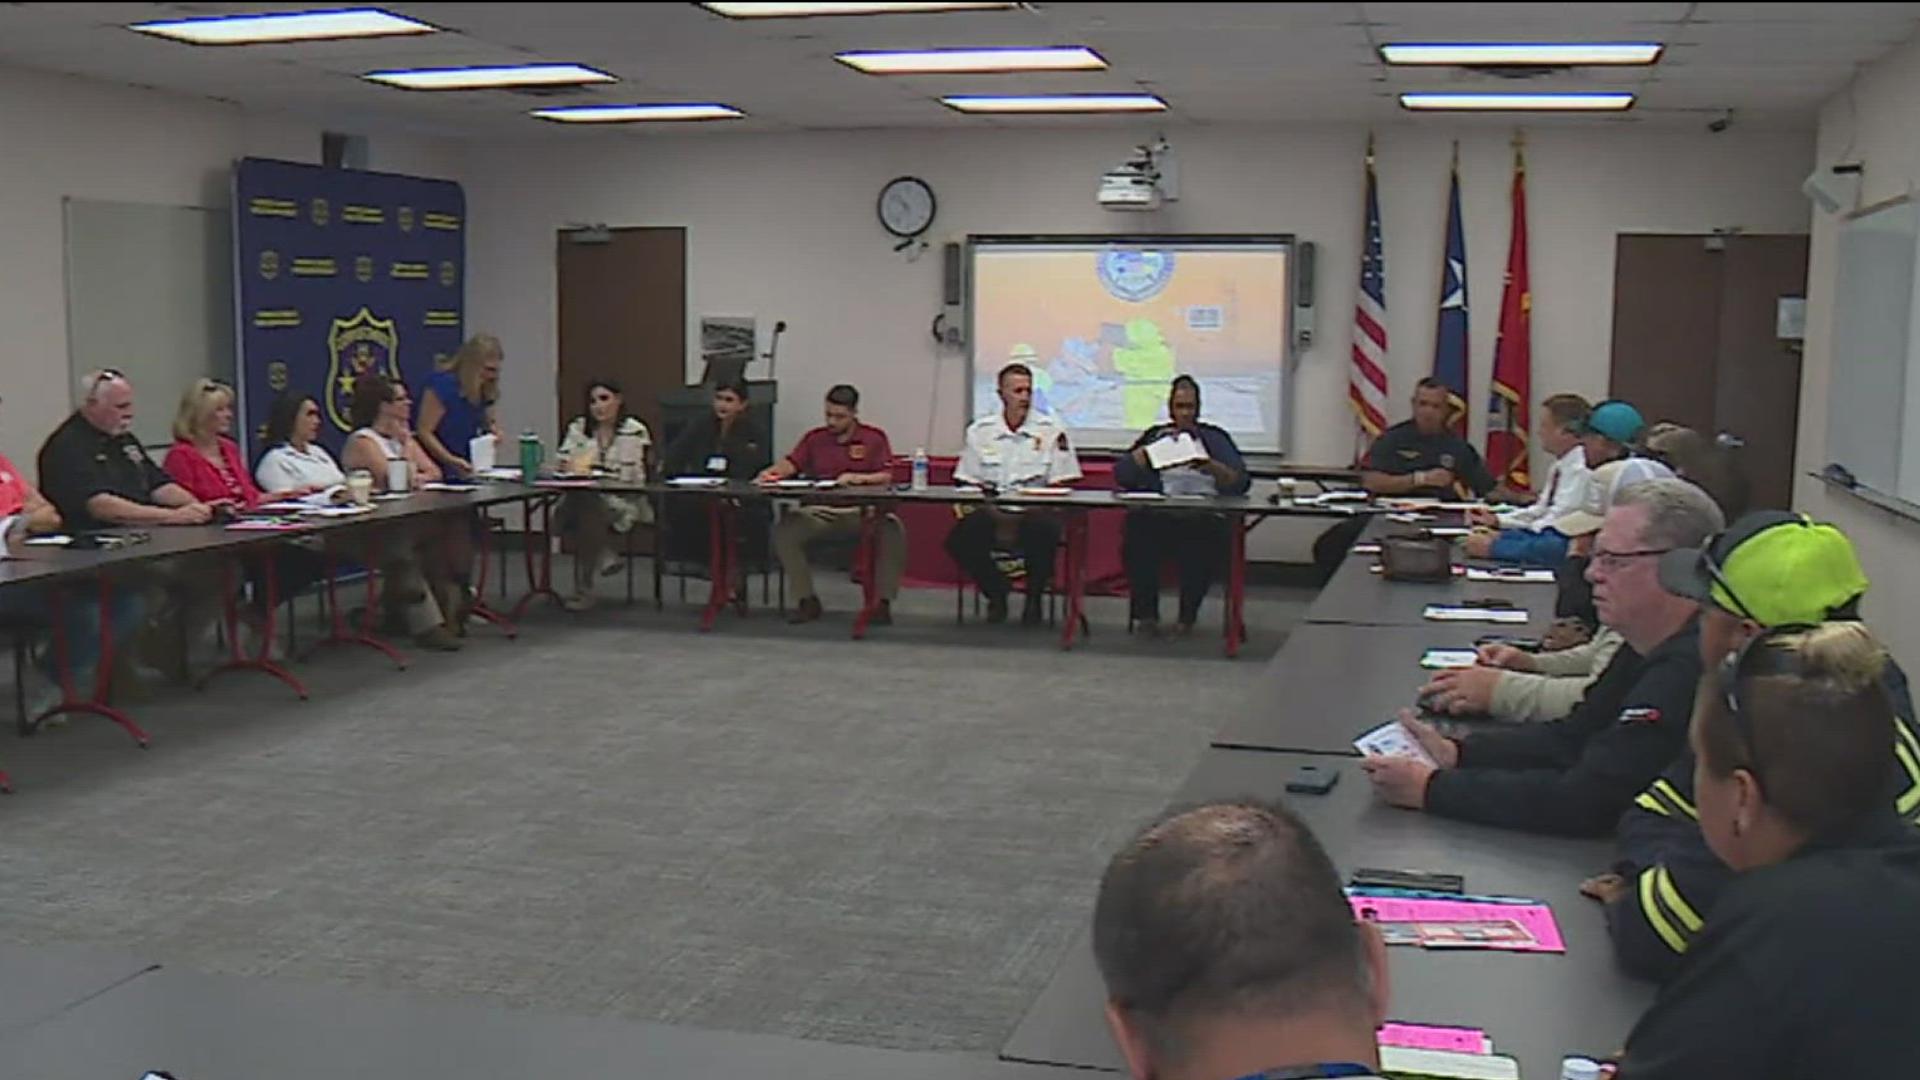 City and county leaders reviewed severe weather plans for residents as more tropical activity develops in the Atlantic.